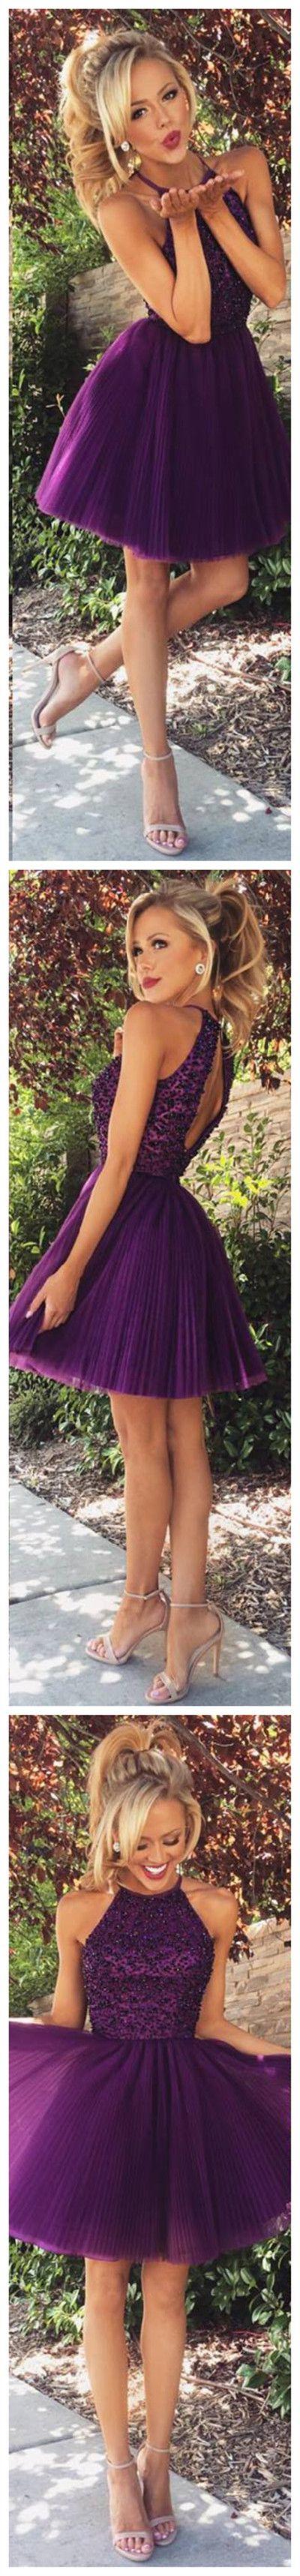 Hochzeit - A-line High Neck Black Beaded Bodice Grape Tulle Short Prom Homecoming Dresses APD1557 From DiyDressonline